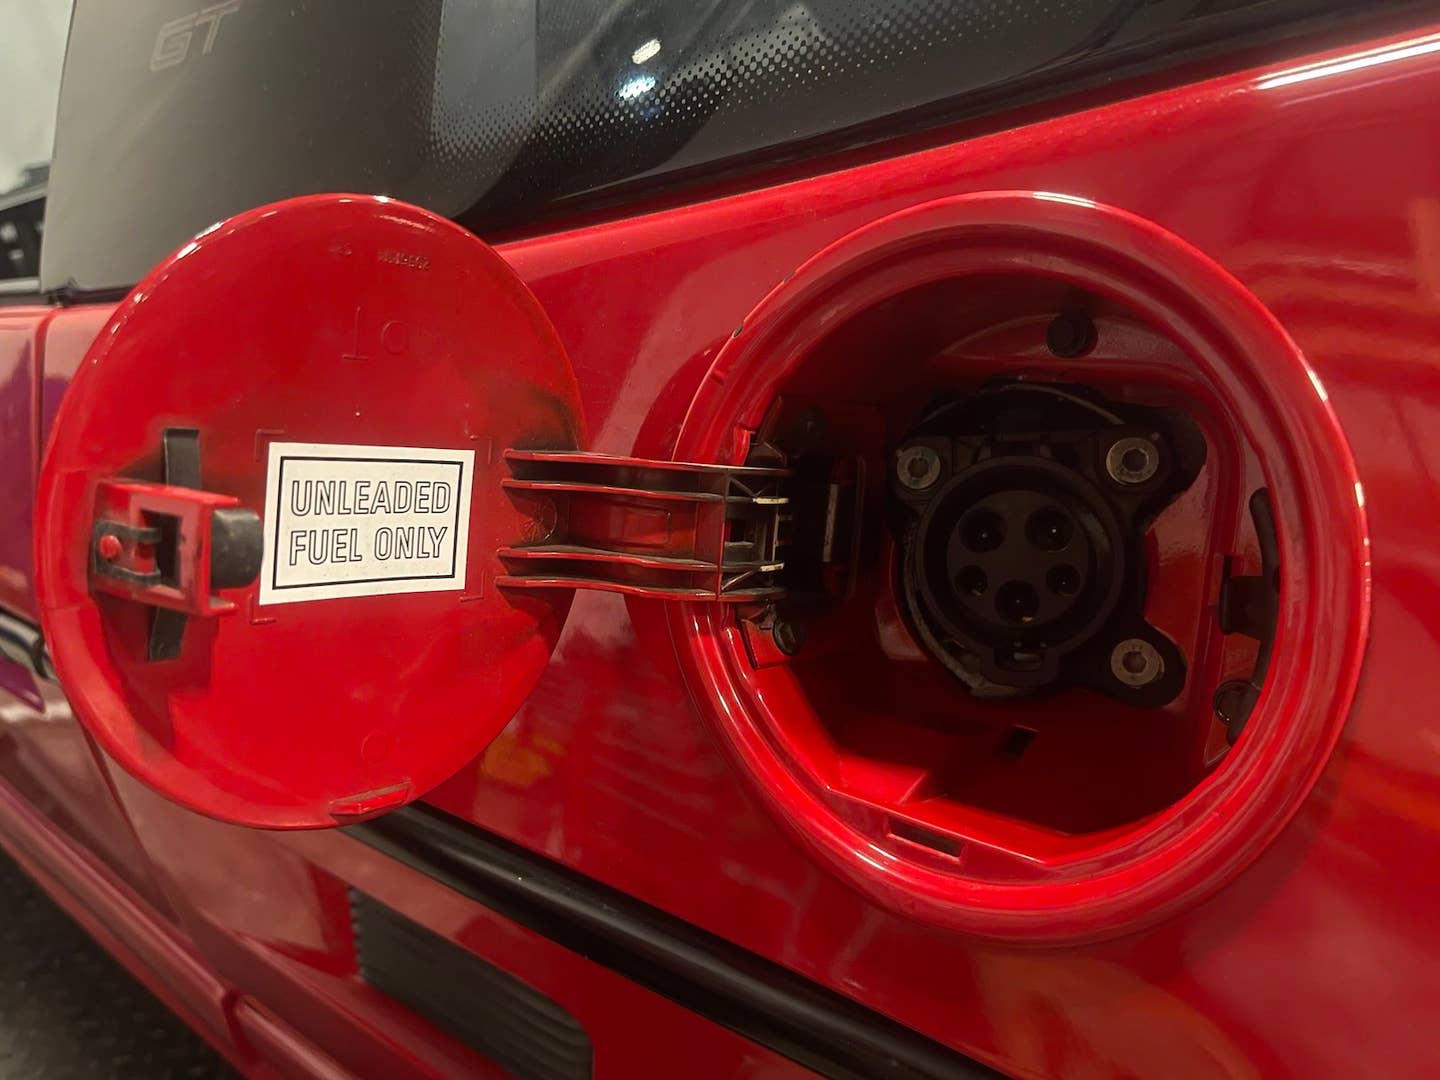 1988 Pontiac Fiero GT EV by Classic EV Conversions. A charge port can be seen inside the gas cap.